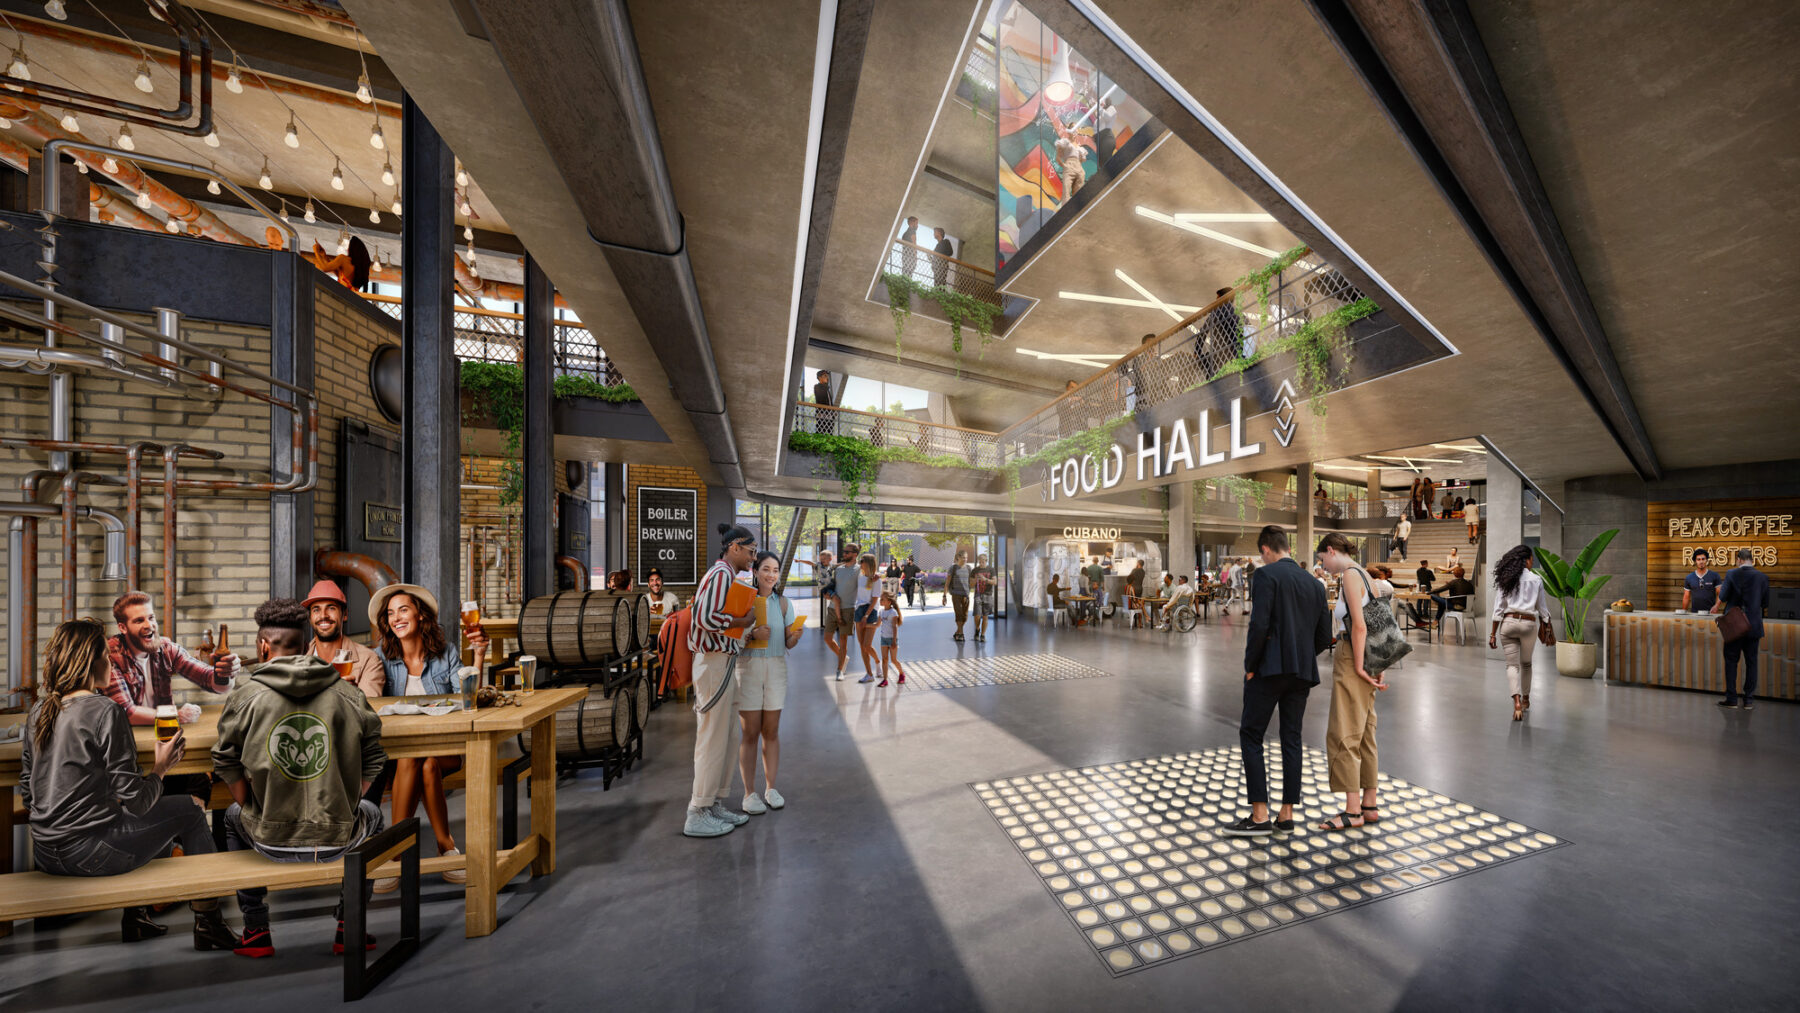 Rendered interior view of the food hall with open courtyard ceiling showing office spaces above